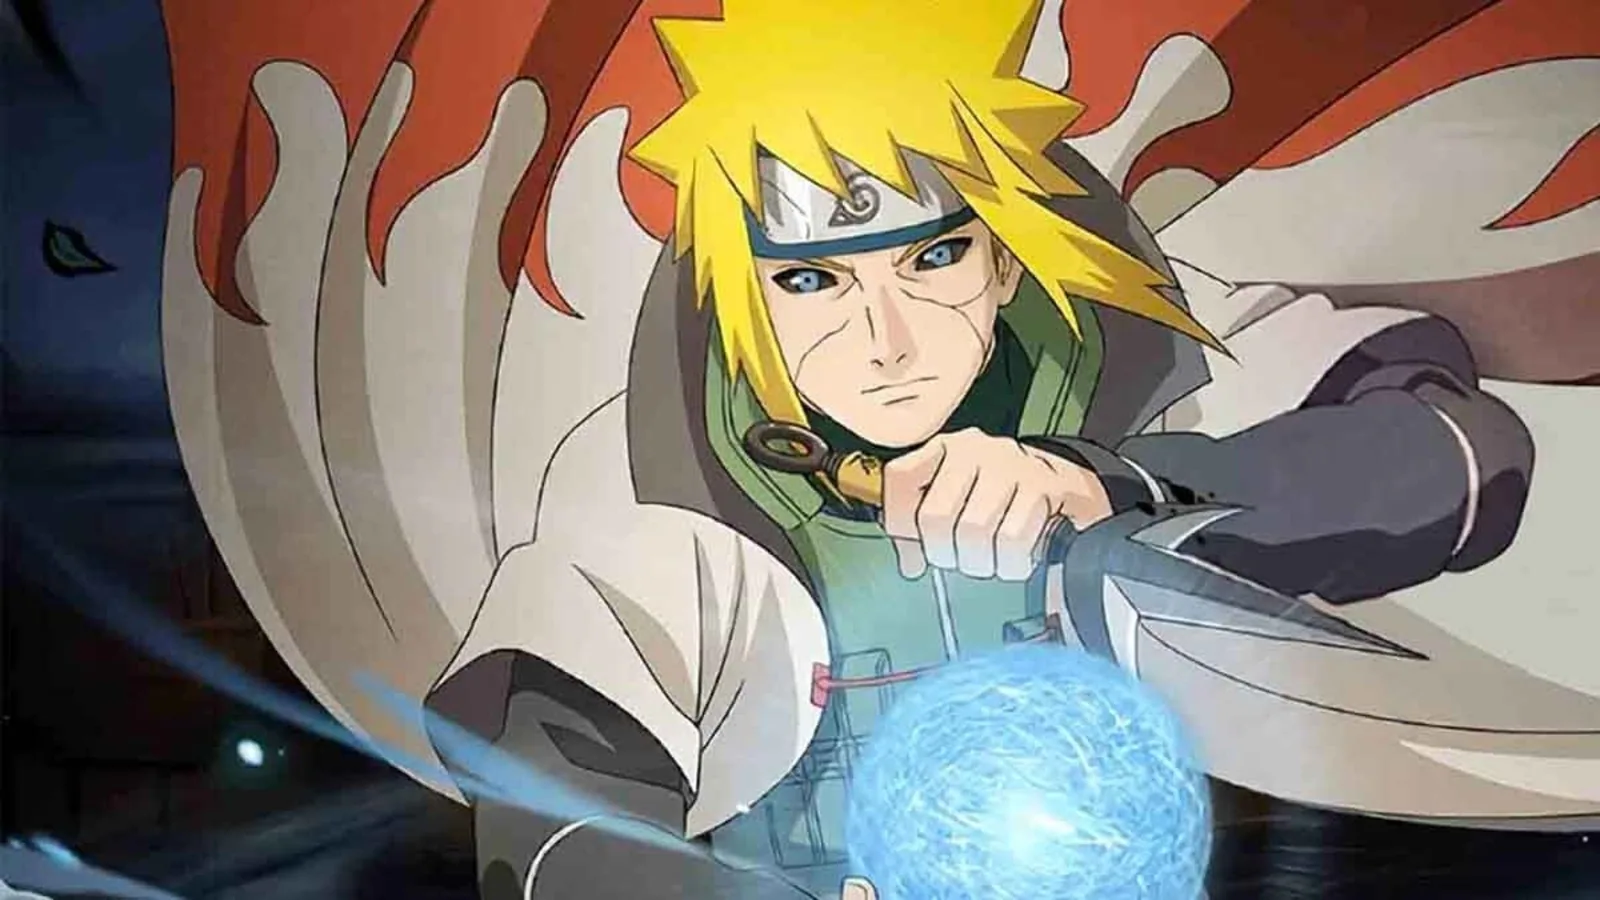 Is Minato's Story Extending Beyond a One-Shot in Naruto Universe? A Closer Look at the Rising Manga Buzz